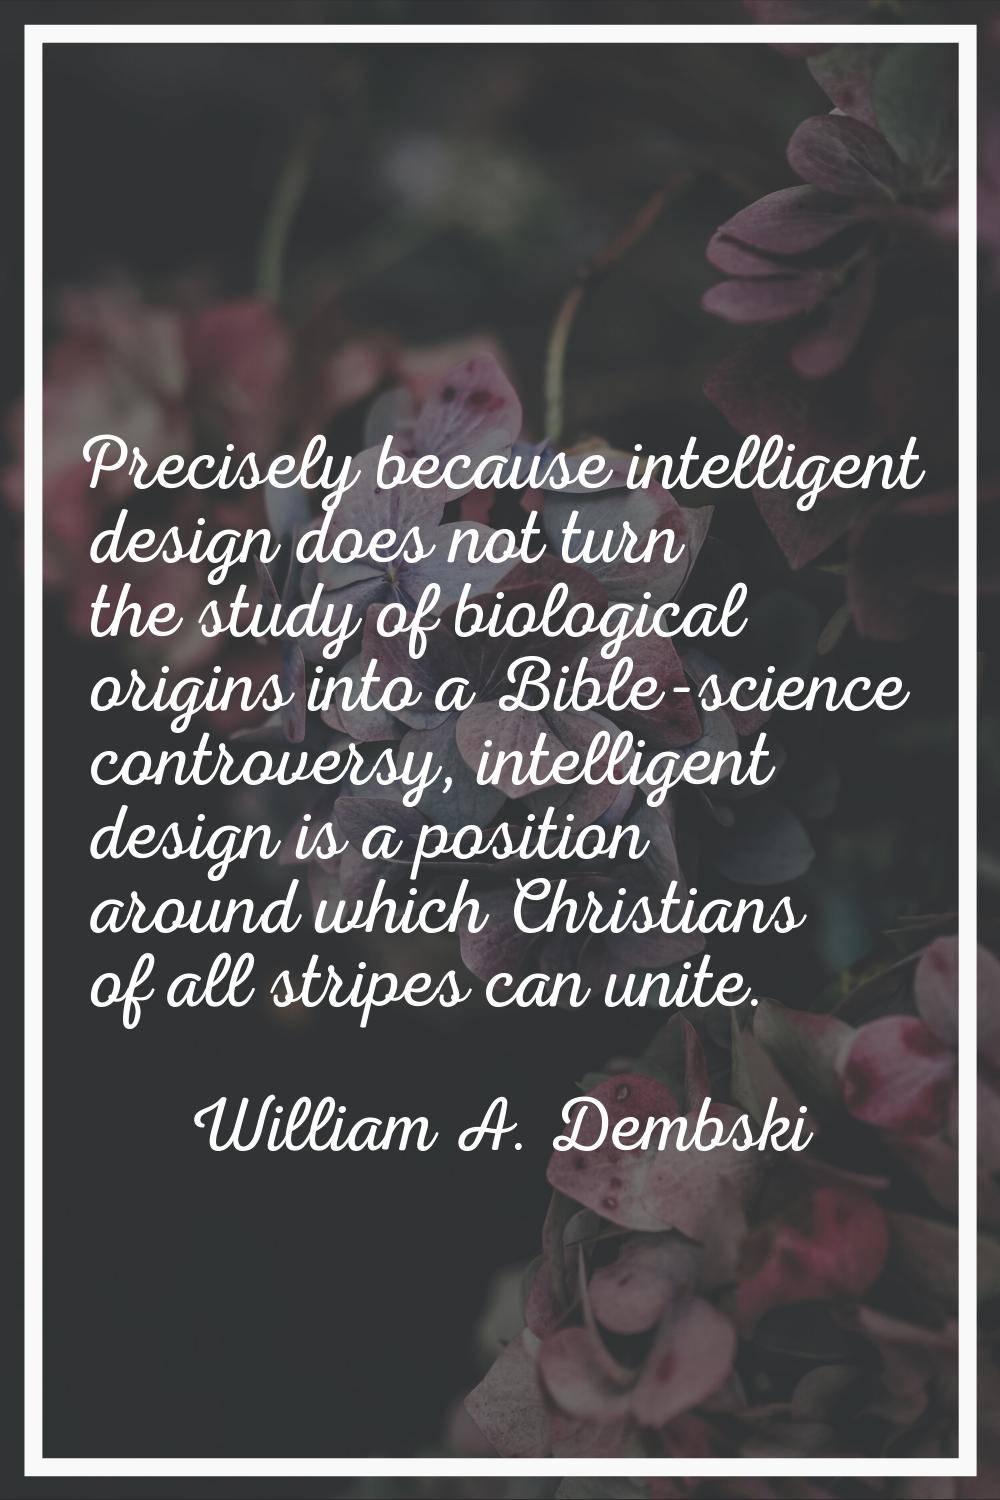 Precisely because intelligent design does not turn the study of biological origins into a Bible-sci